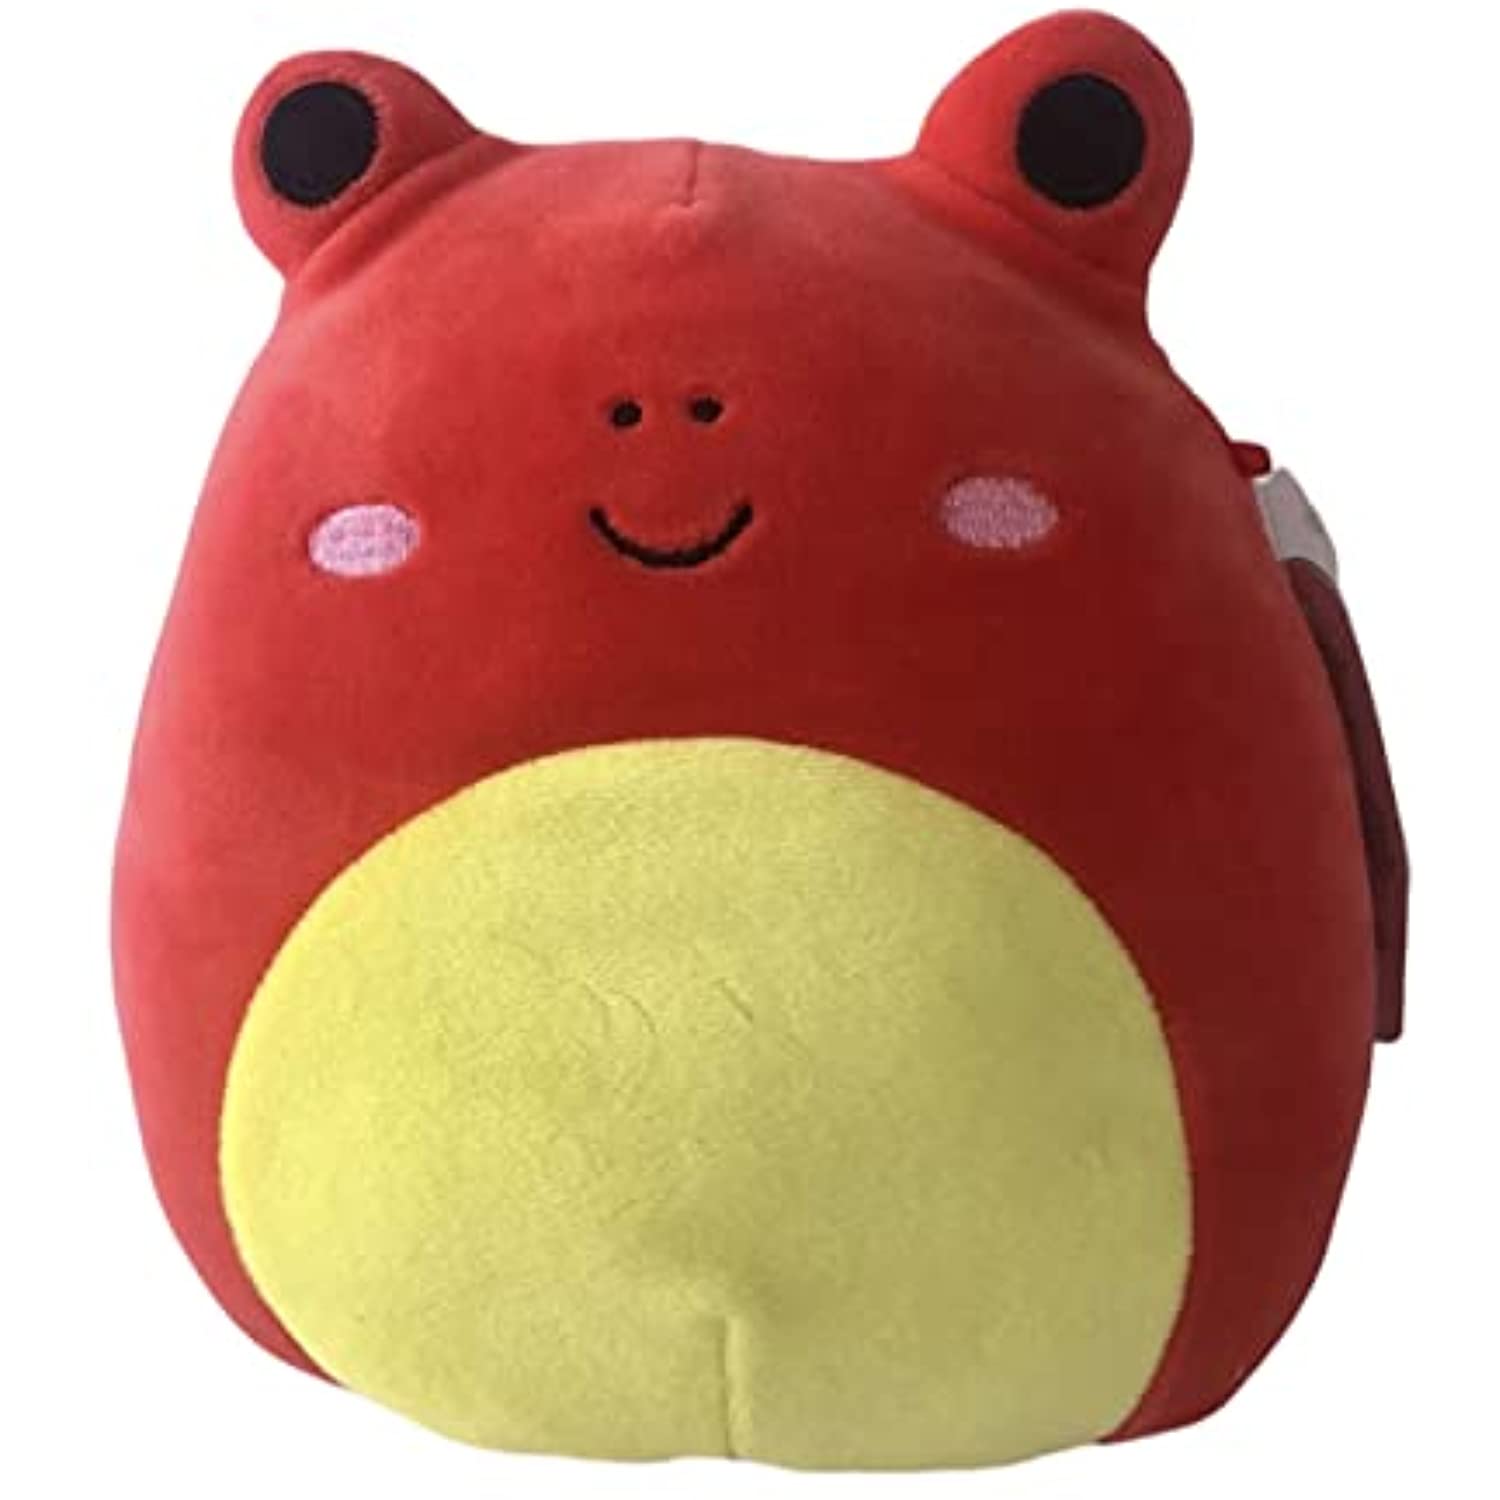 Squishmallows Obu the Spotted Red Frog 7.5 Plush Stuffed Animal